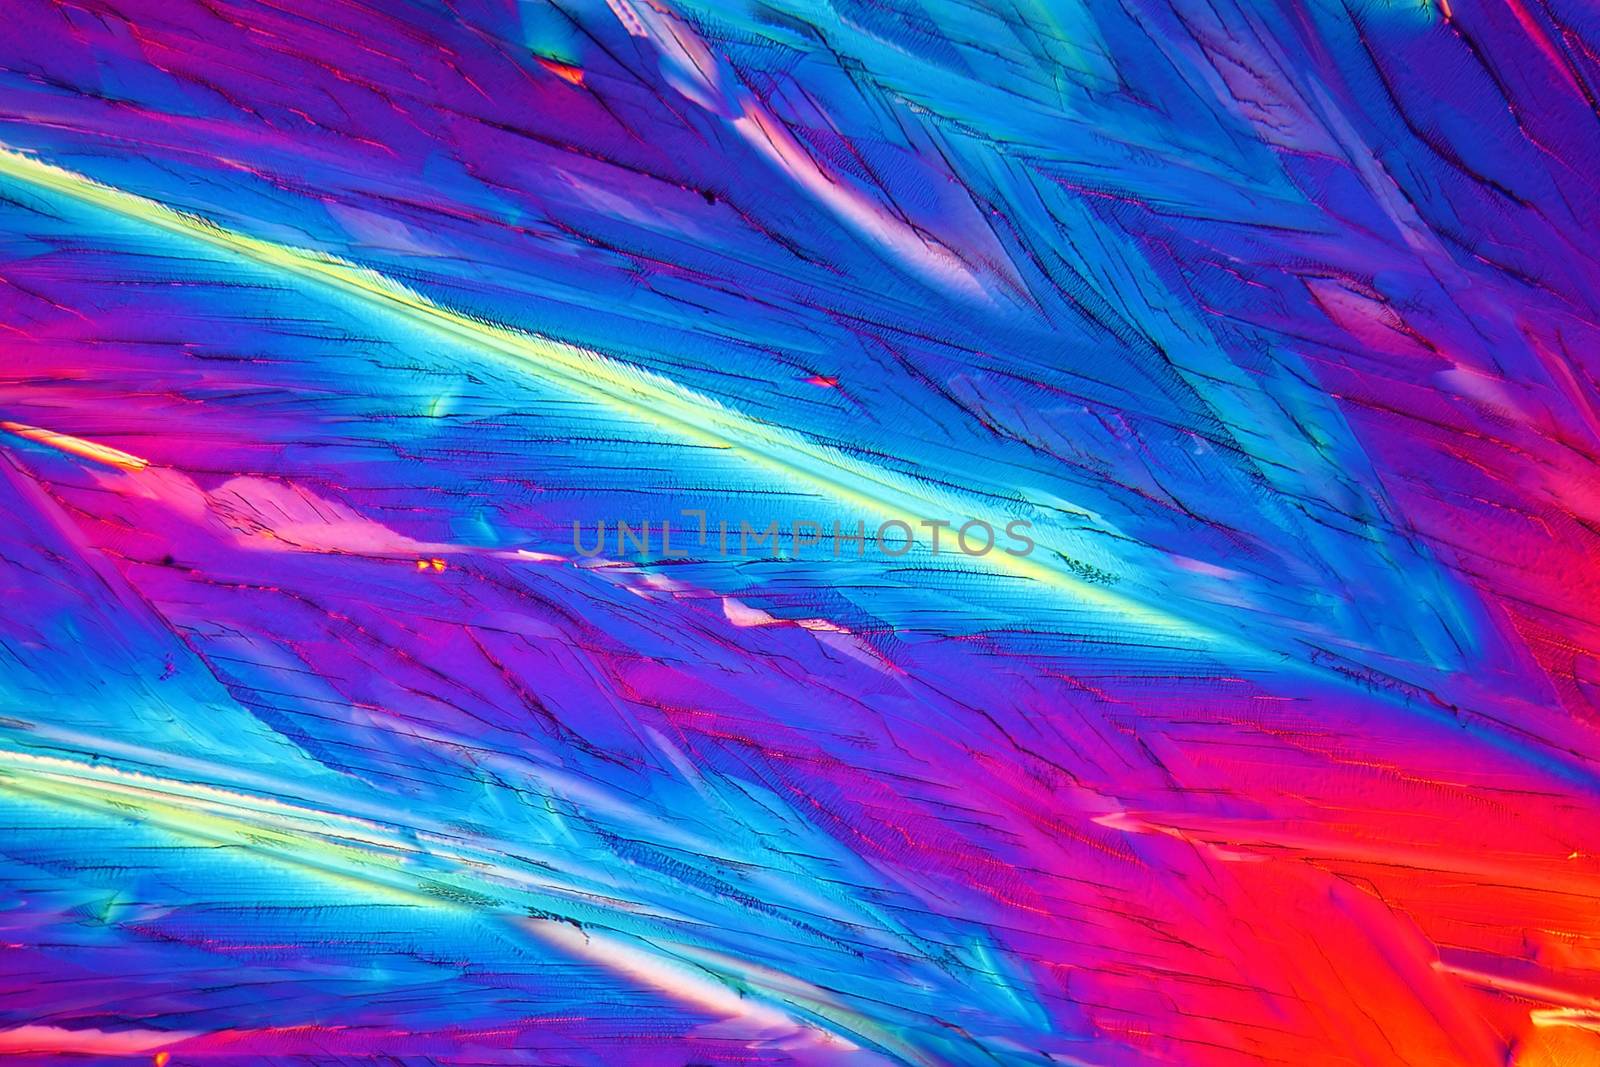 Citric Acid under the Microscope by CWeiss